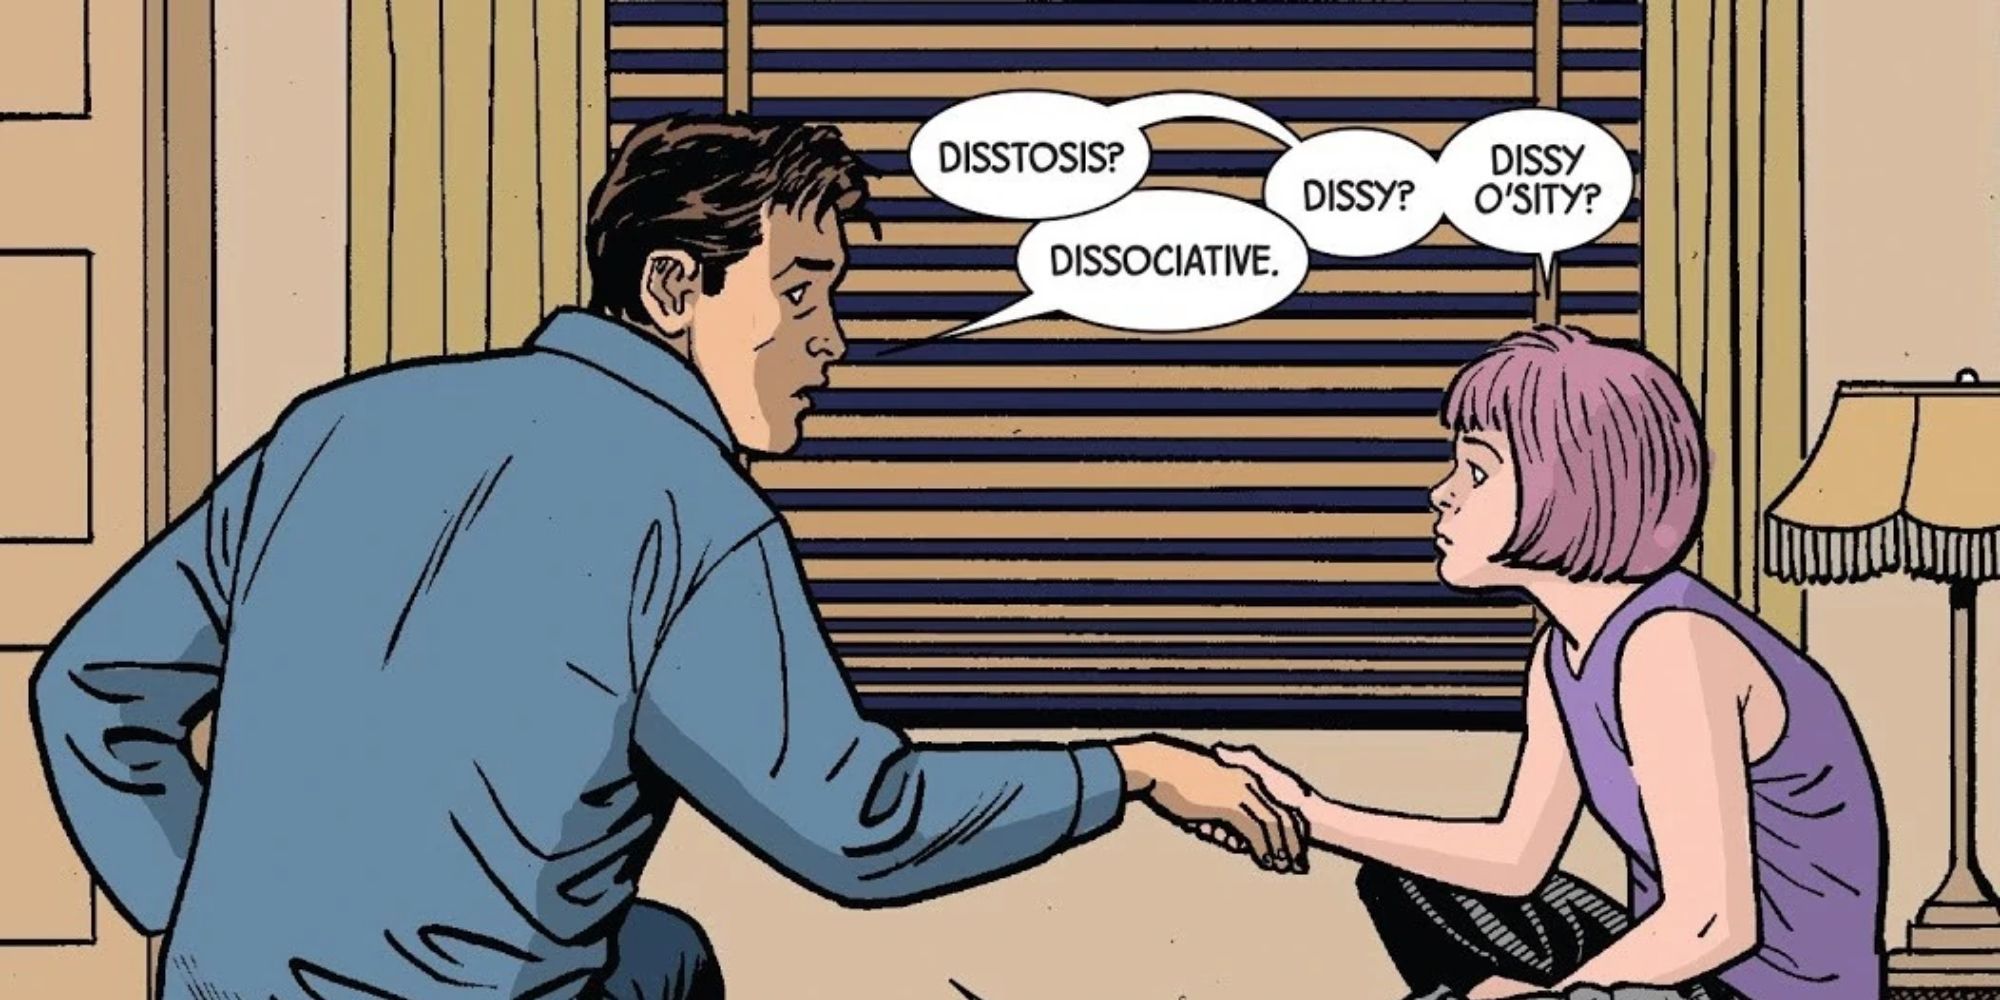 Comic Marc Spector explains dissociative identity disorder to his daughter, diatrice